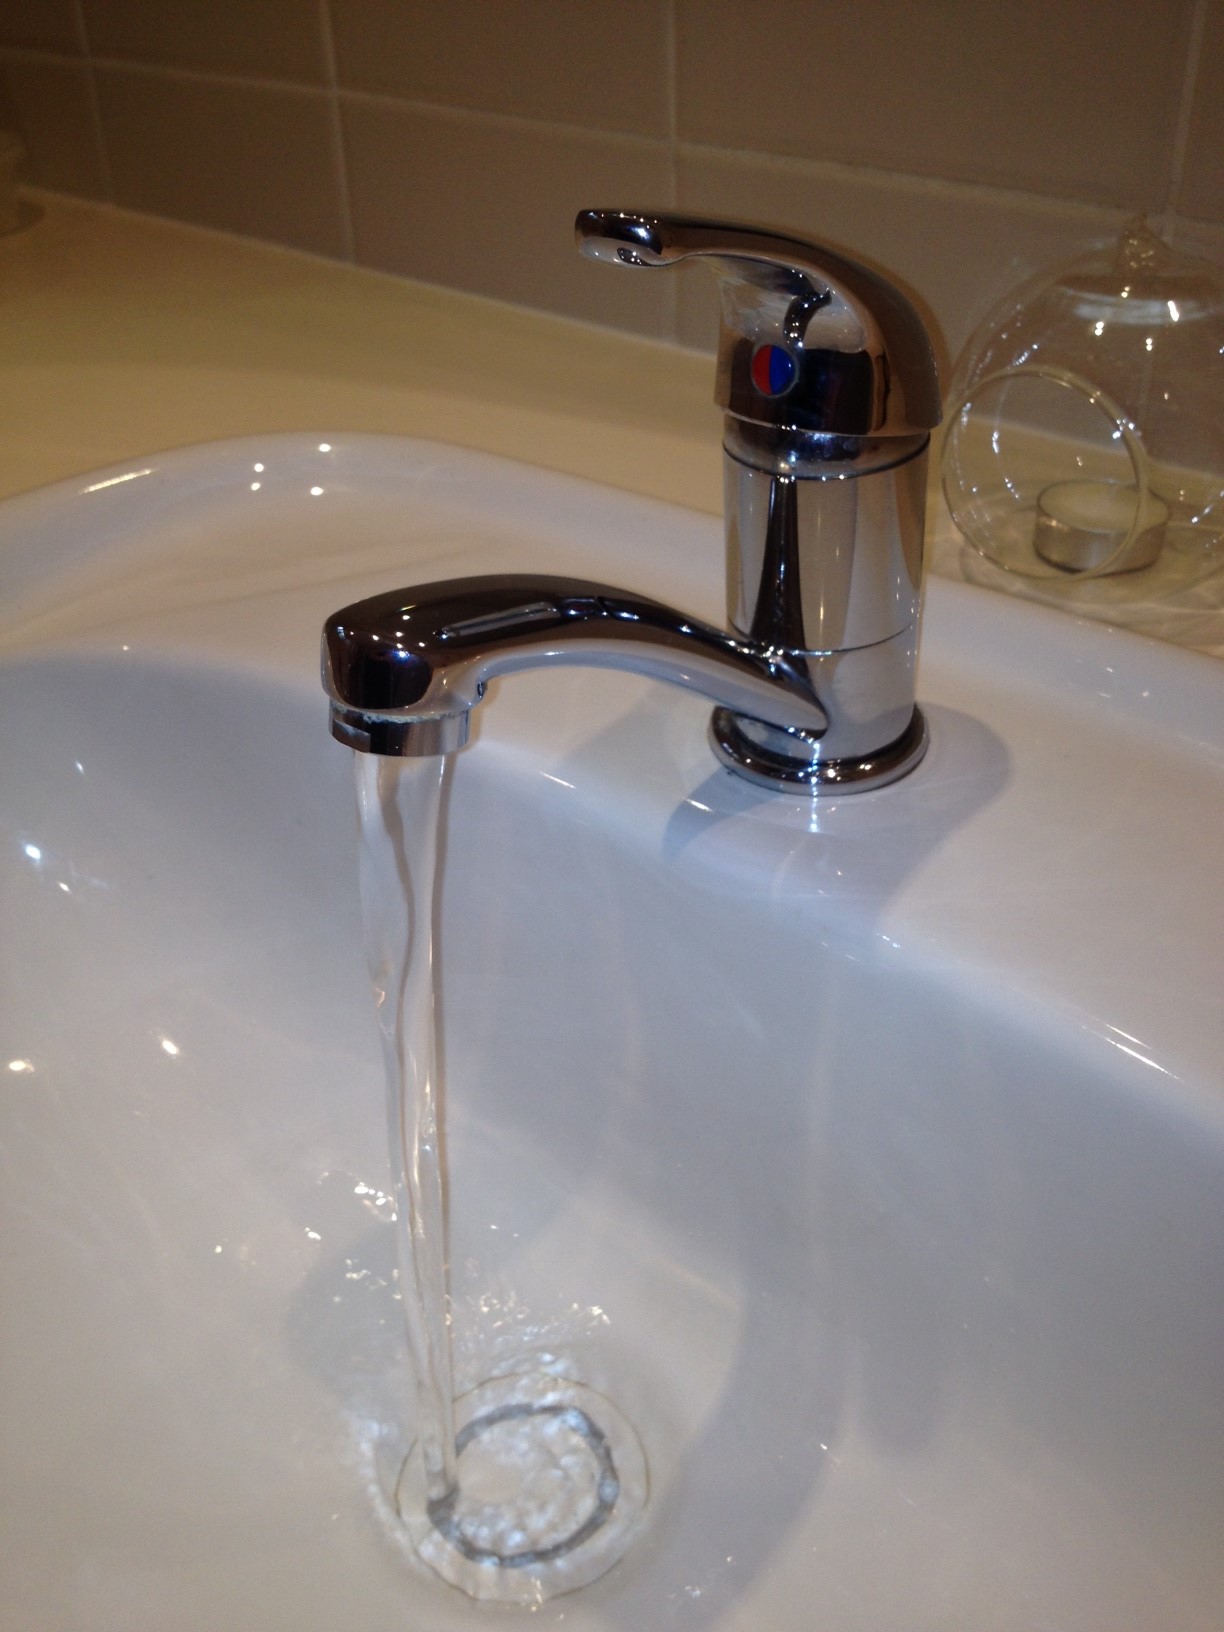 Tap runing water into a hand basin